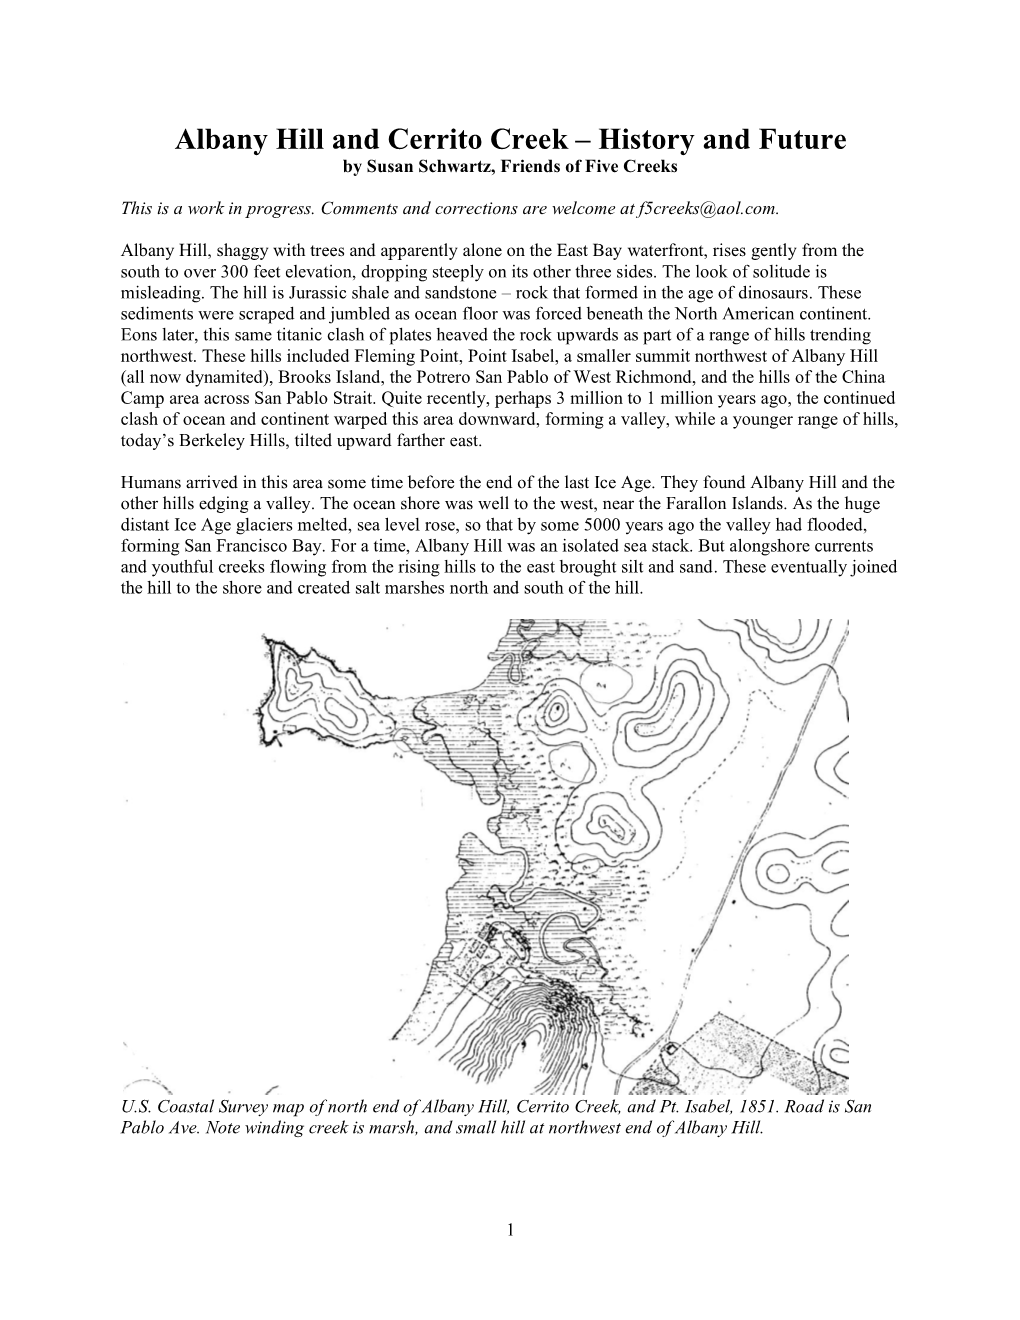 Albany Hill and Cerrito Creek – History and Future by Susan Schwartz, Friends of Five Creeks